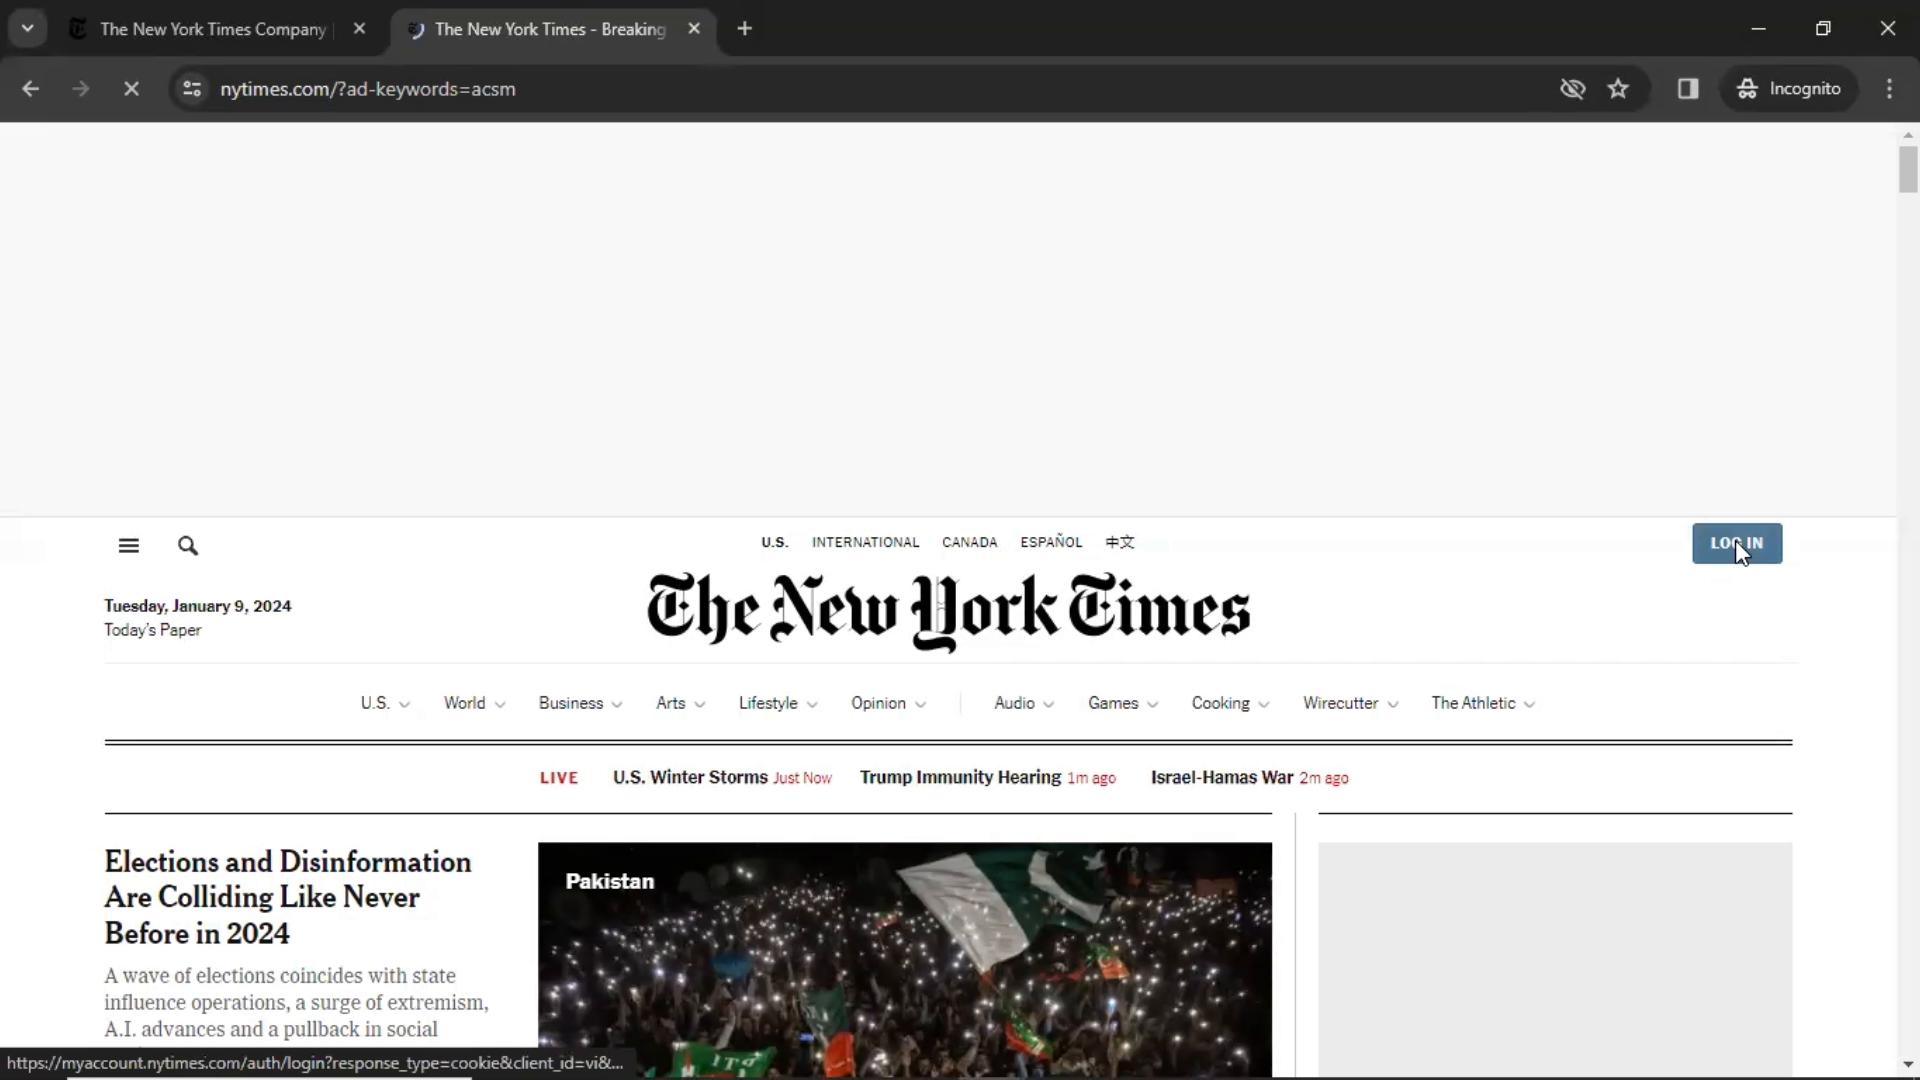 Logging in on The New York Times video screenshot